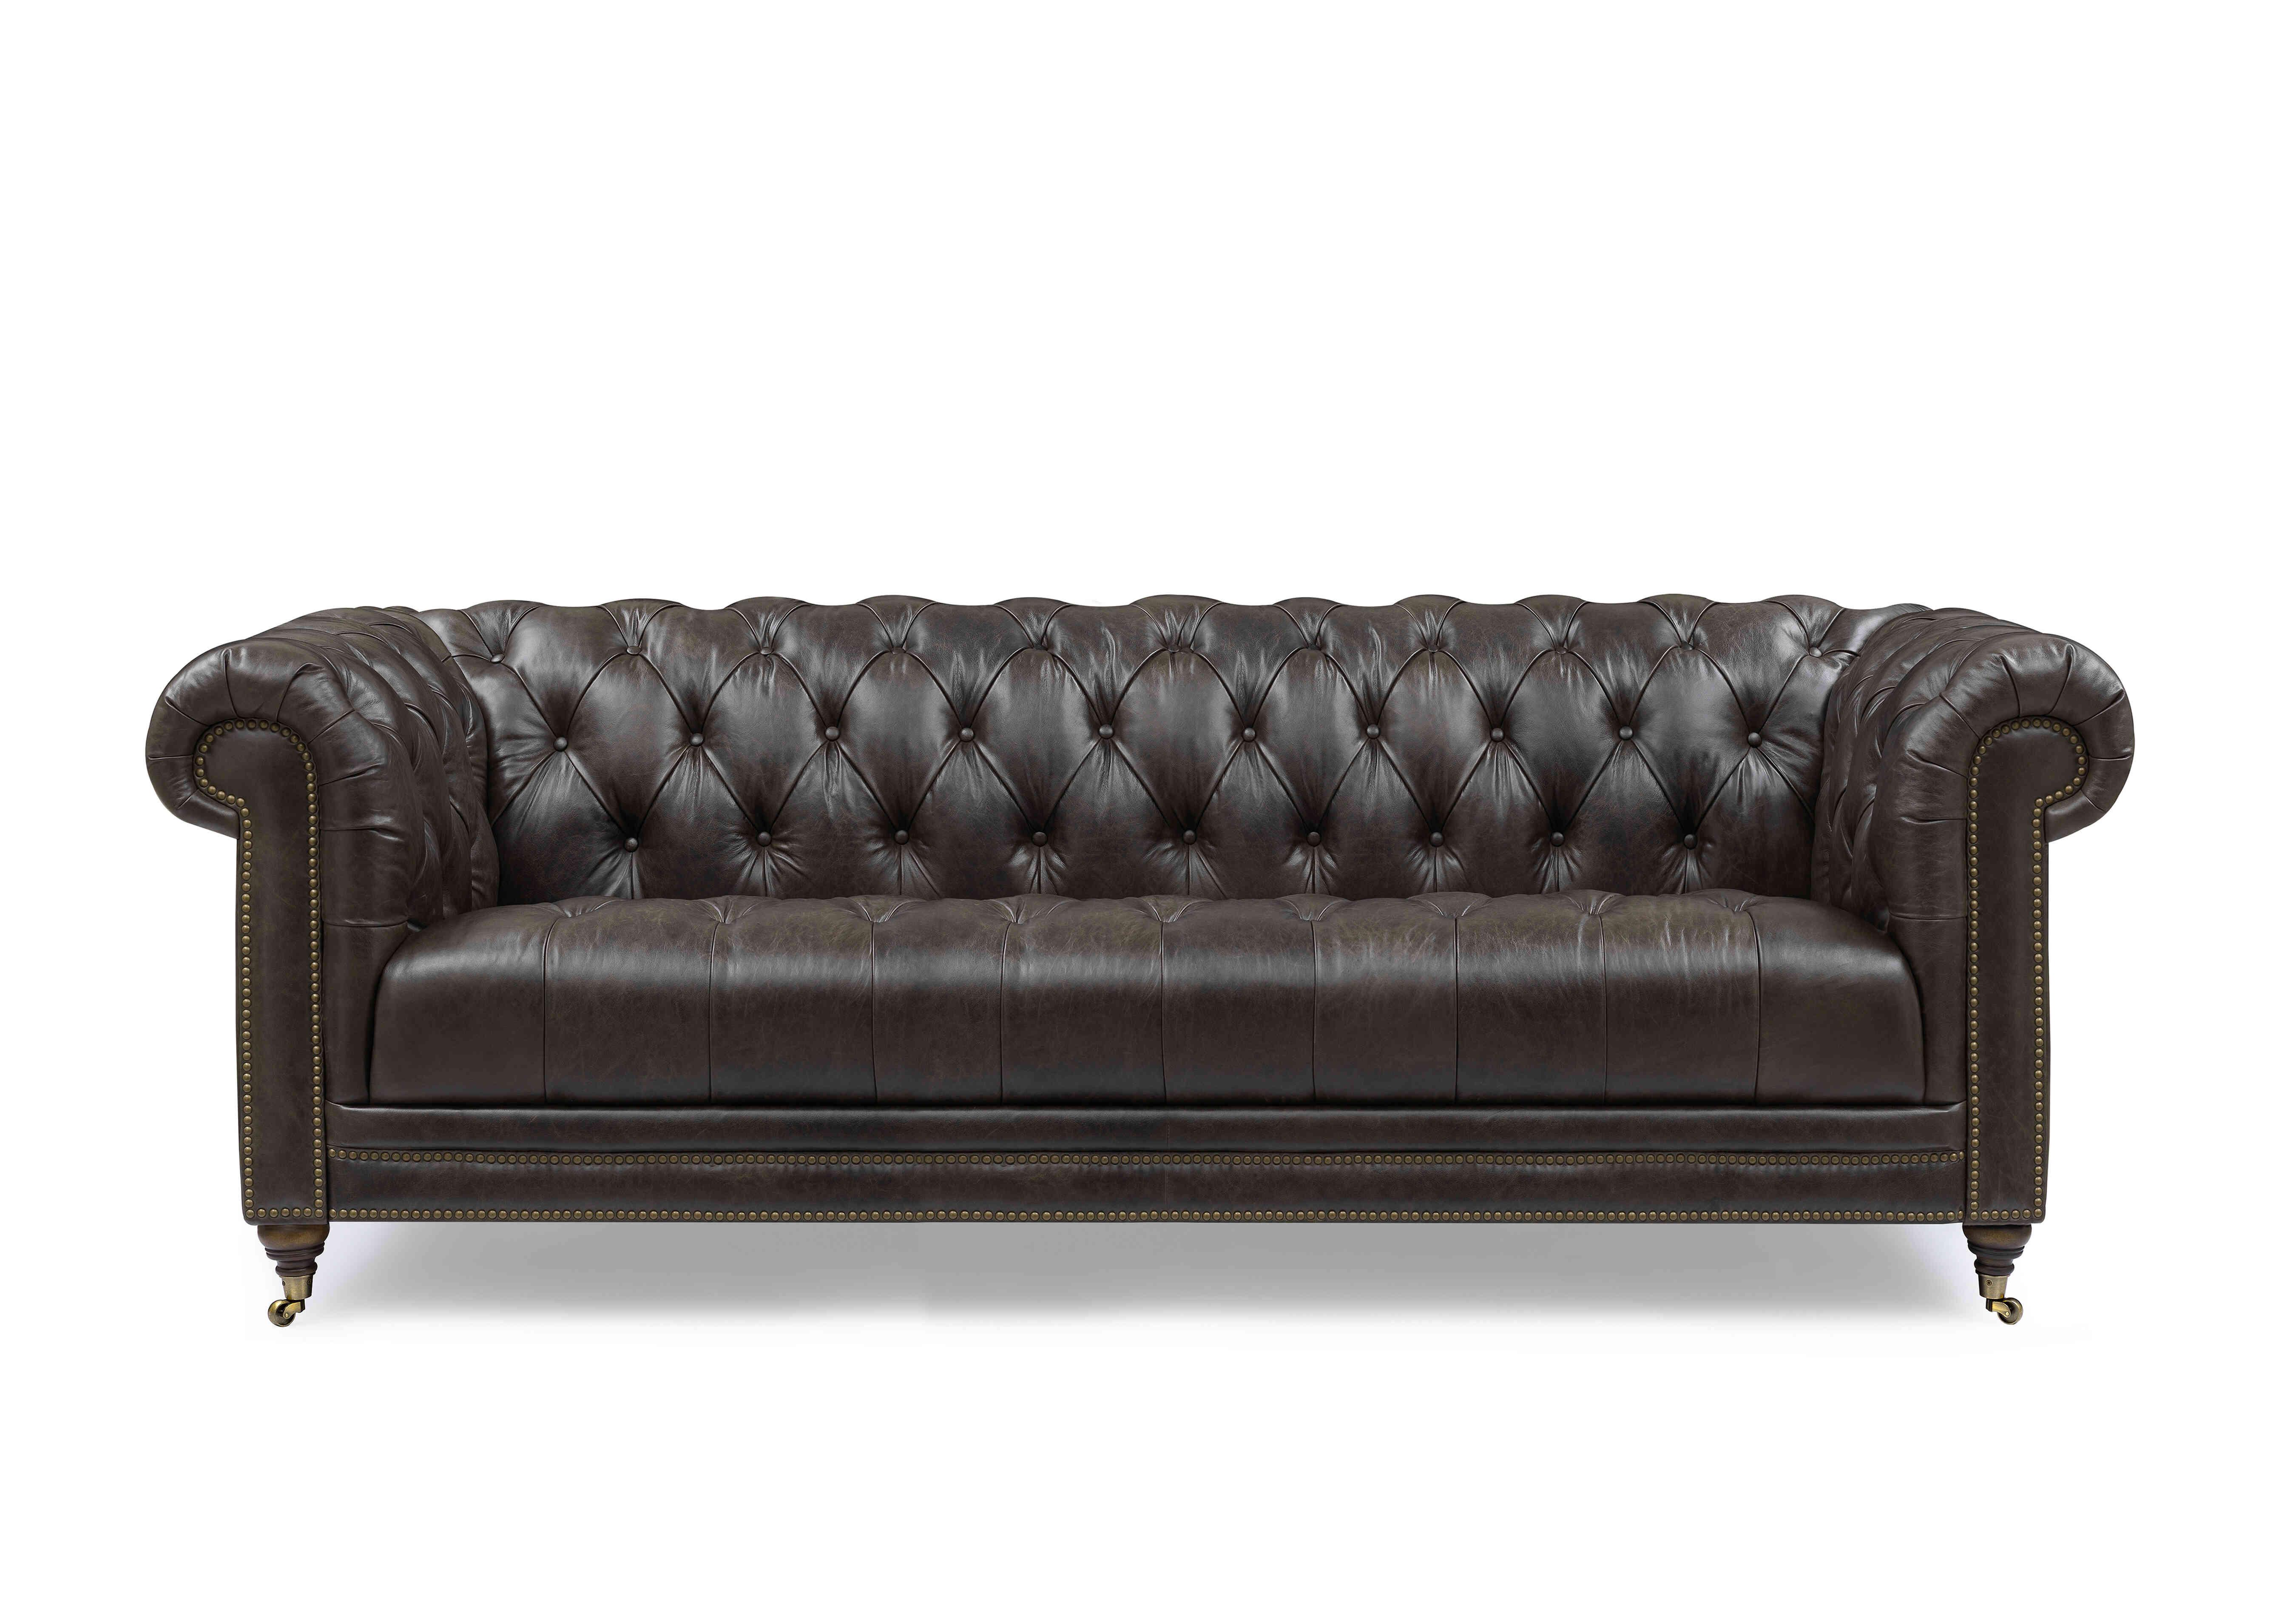 Walter 4 Seater Leather Chesterfield Sofa in X3y1-1759ls Cannon on Furniture Village